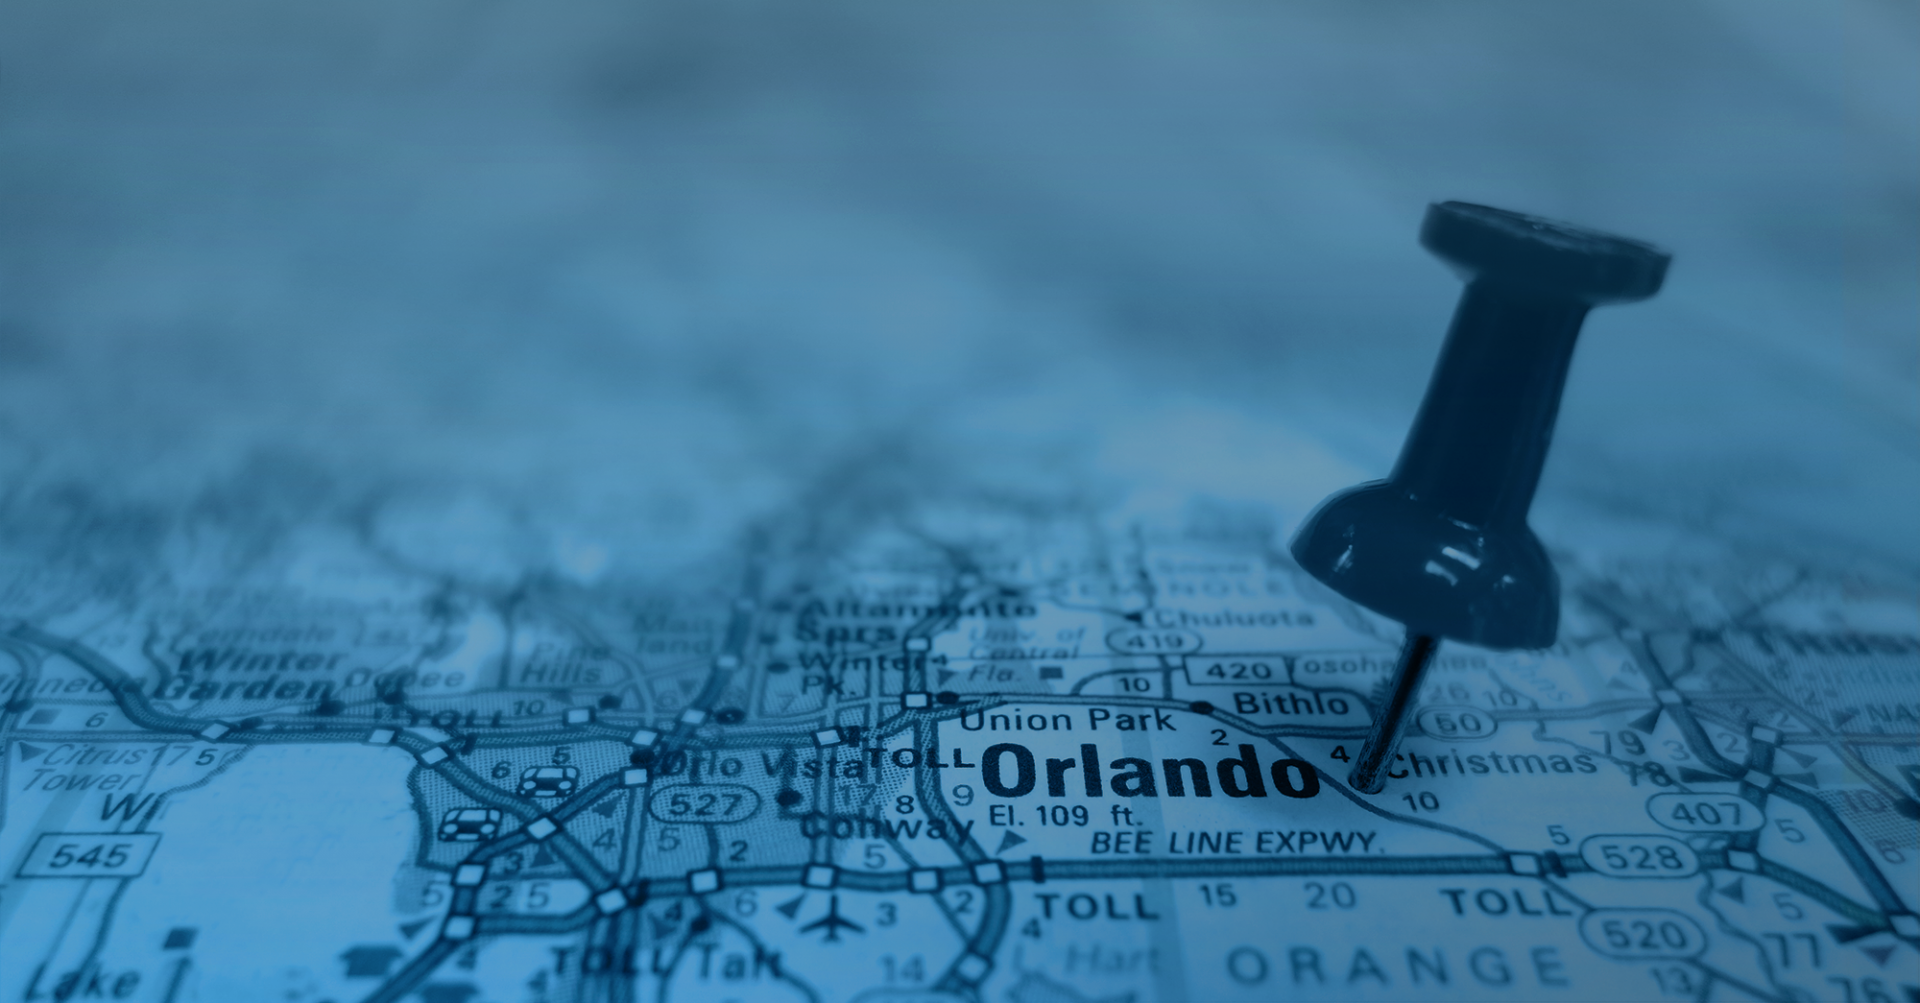 Orlando on a map, marked by a pin